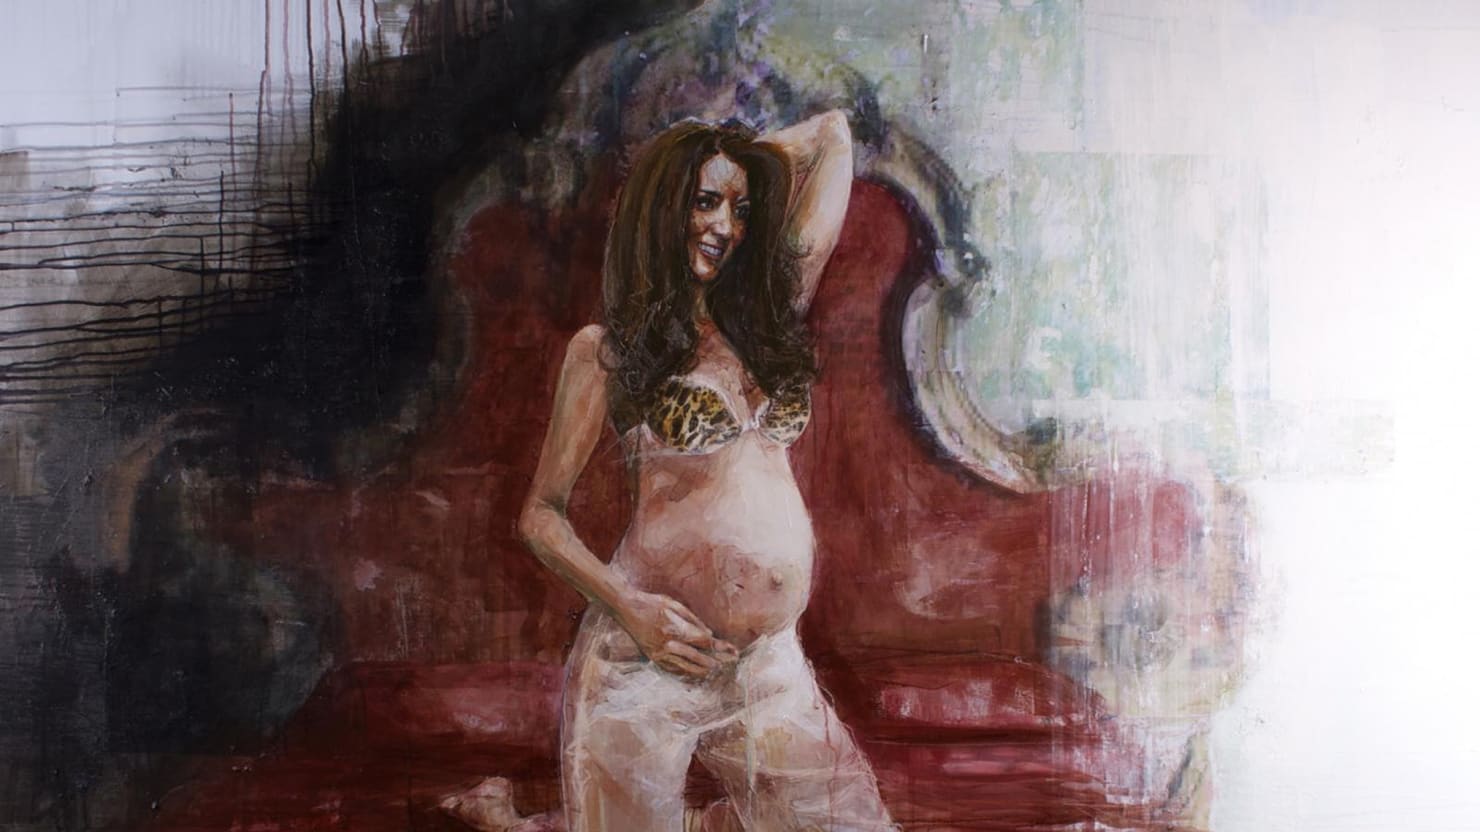 Controversial Semi-Clothed Kate Middleton Artist Wins British Award.